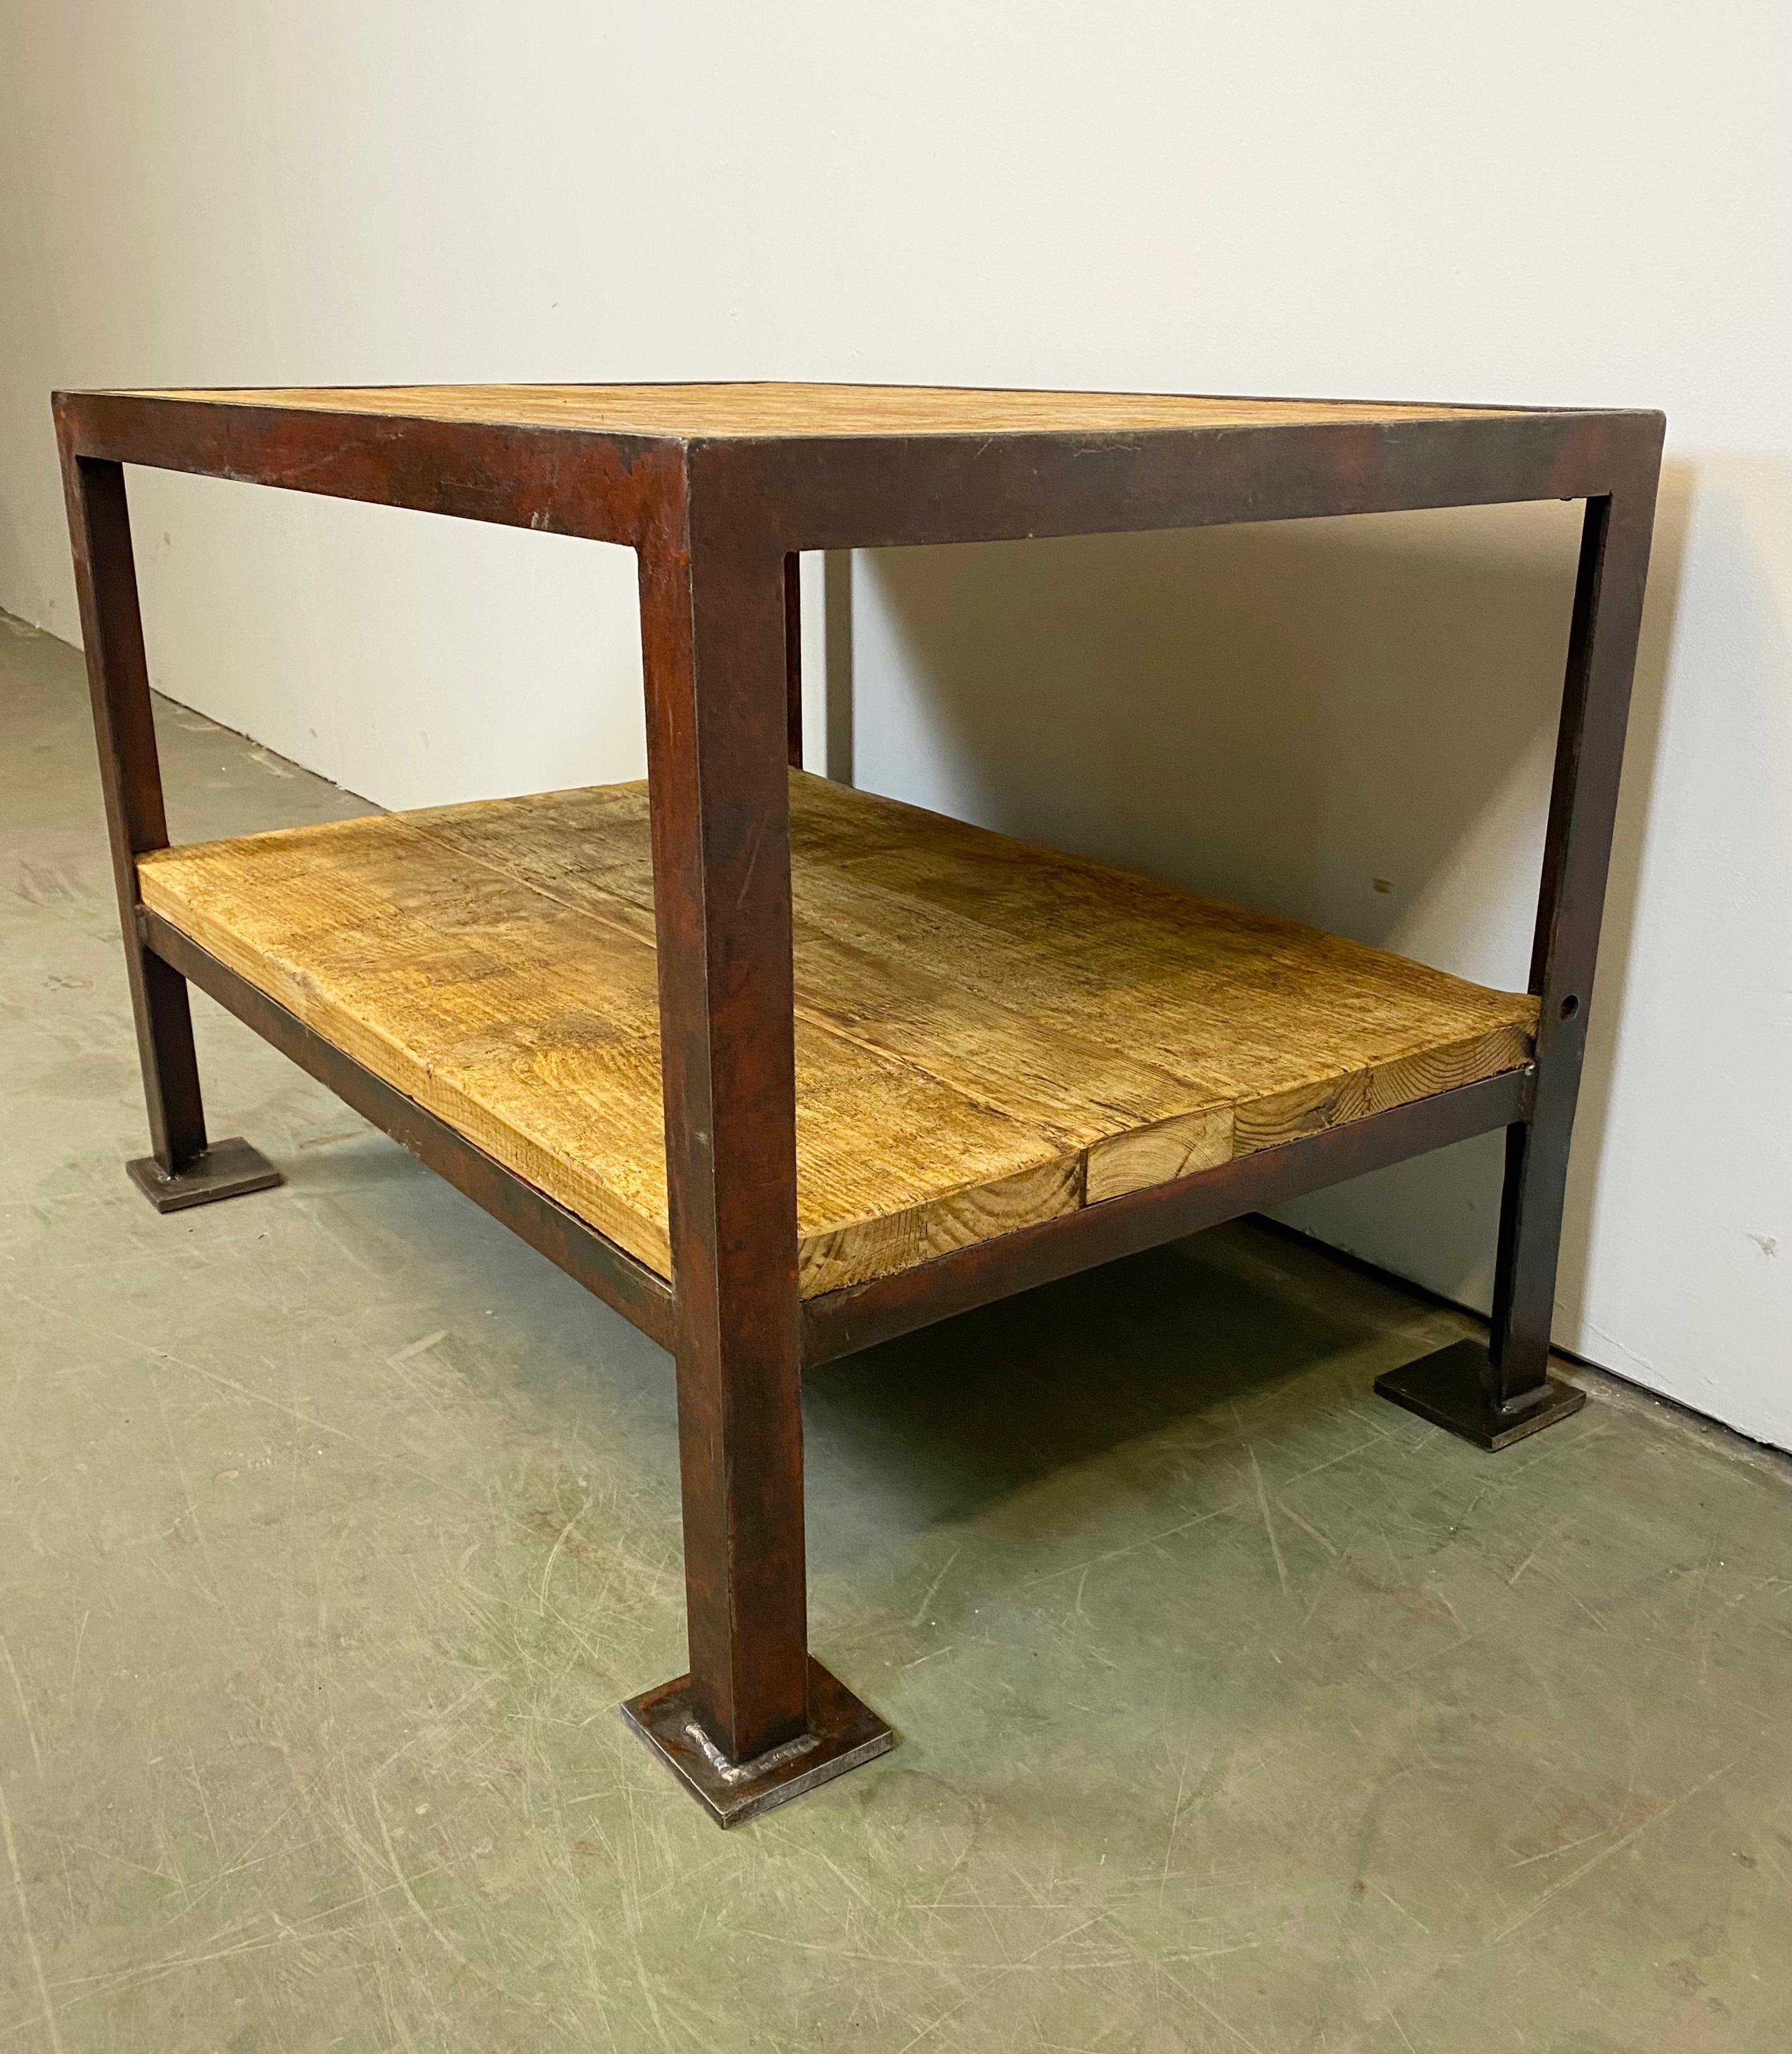 Vintage industrial coffee table from the 1960s. Made of wood and iron. It features a red iron construction and two solid wooden plates. The weight of the table is 52 kg.